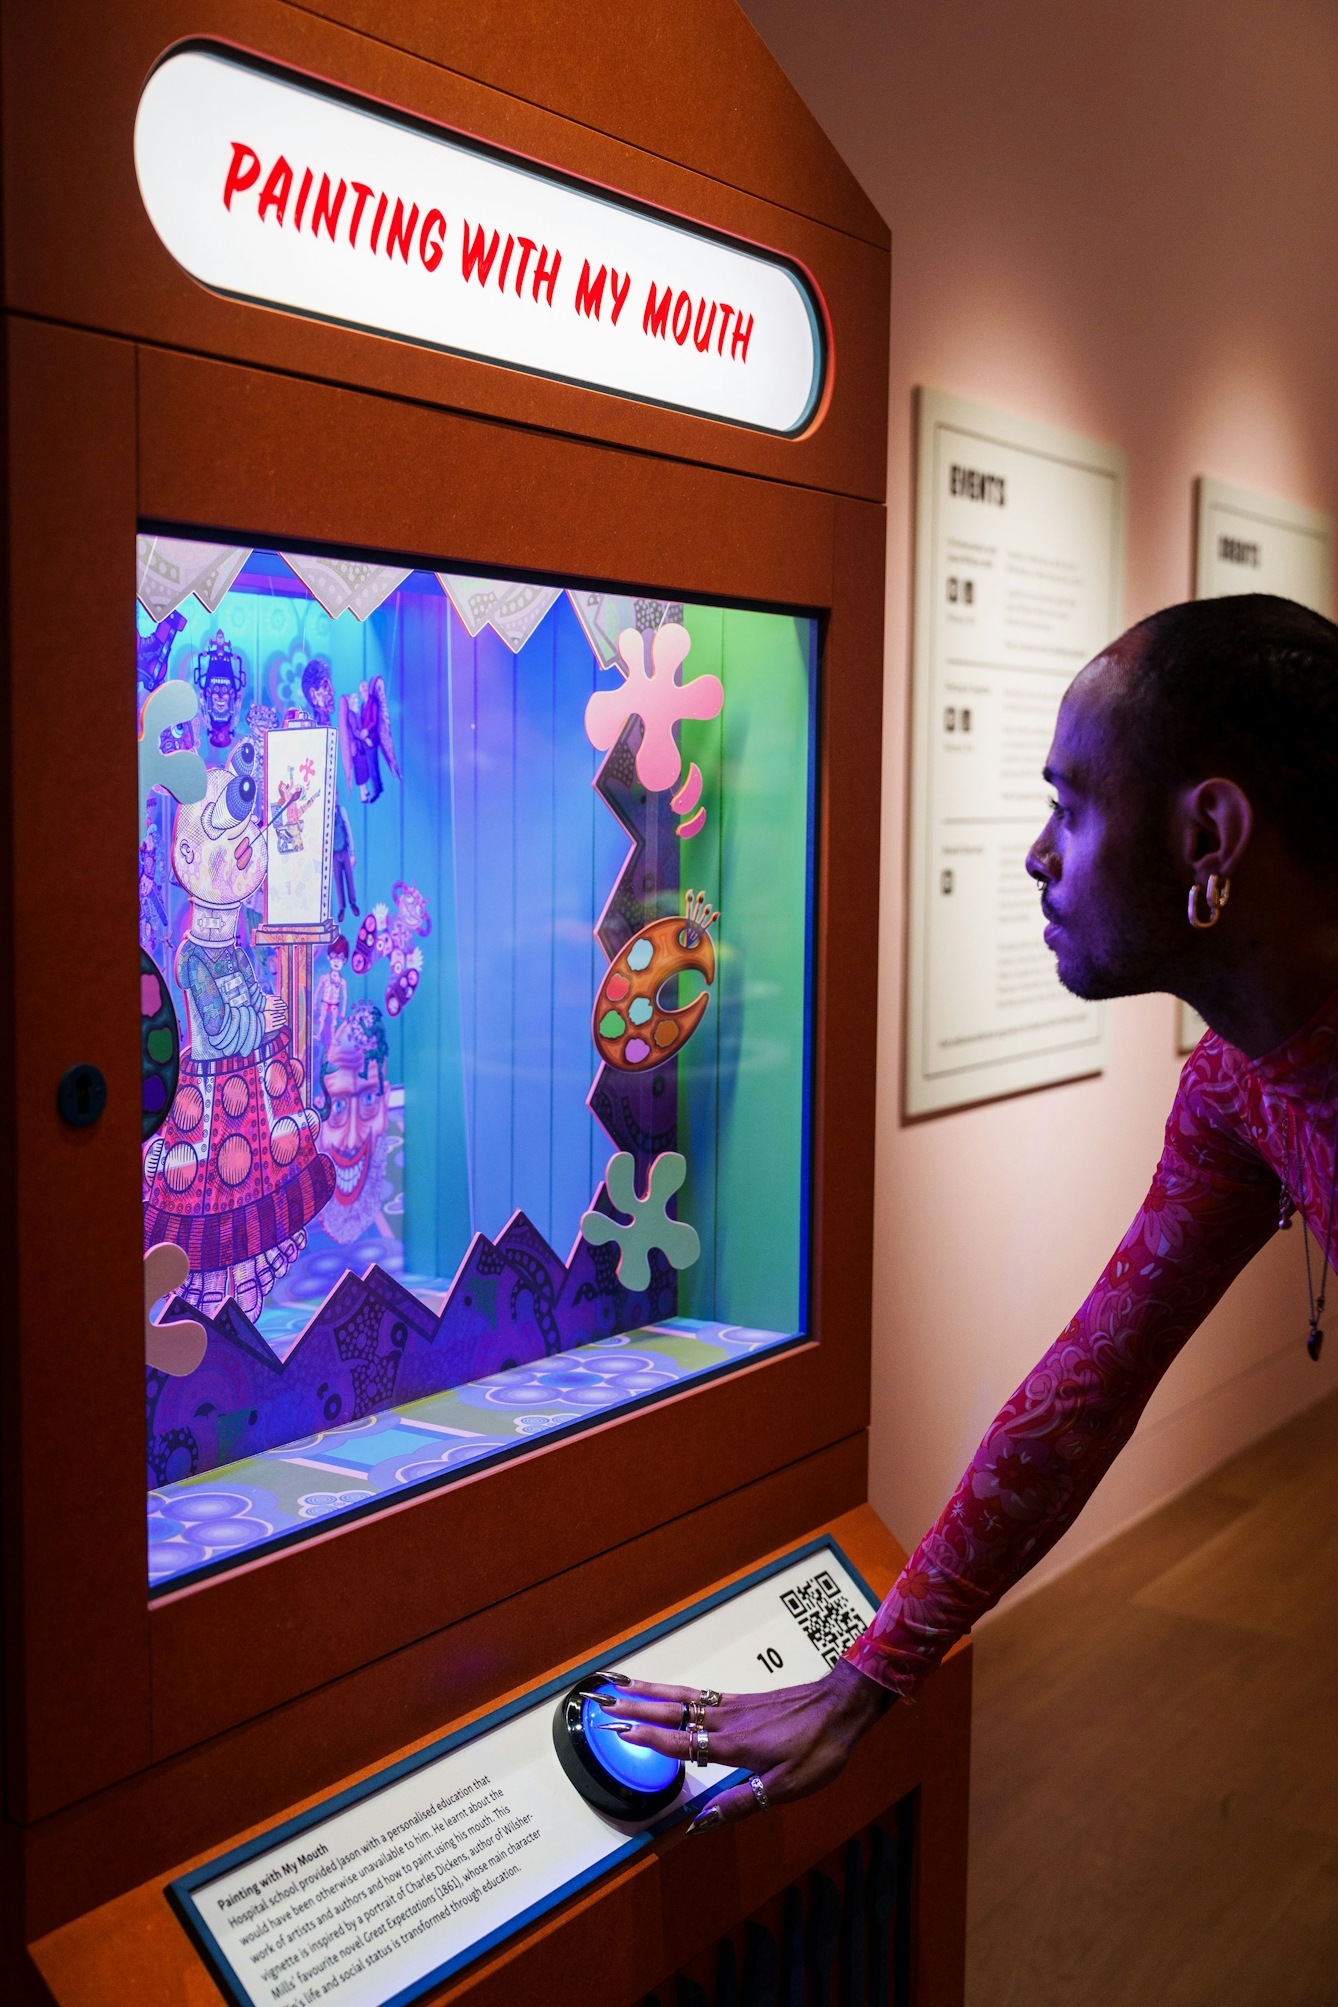 Photograph of a person looking into a box with a glass front. The box contains a diorama.